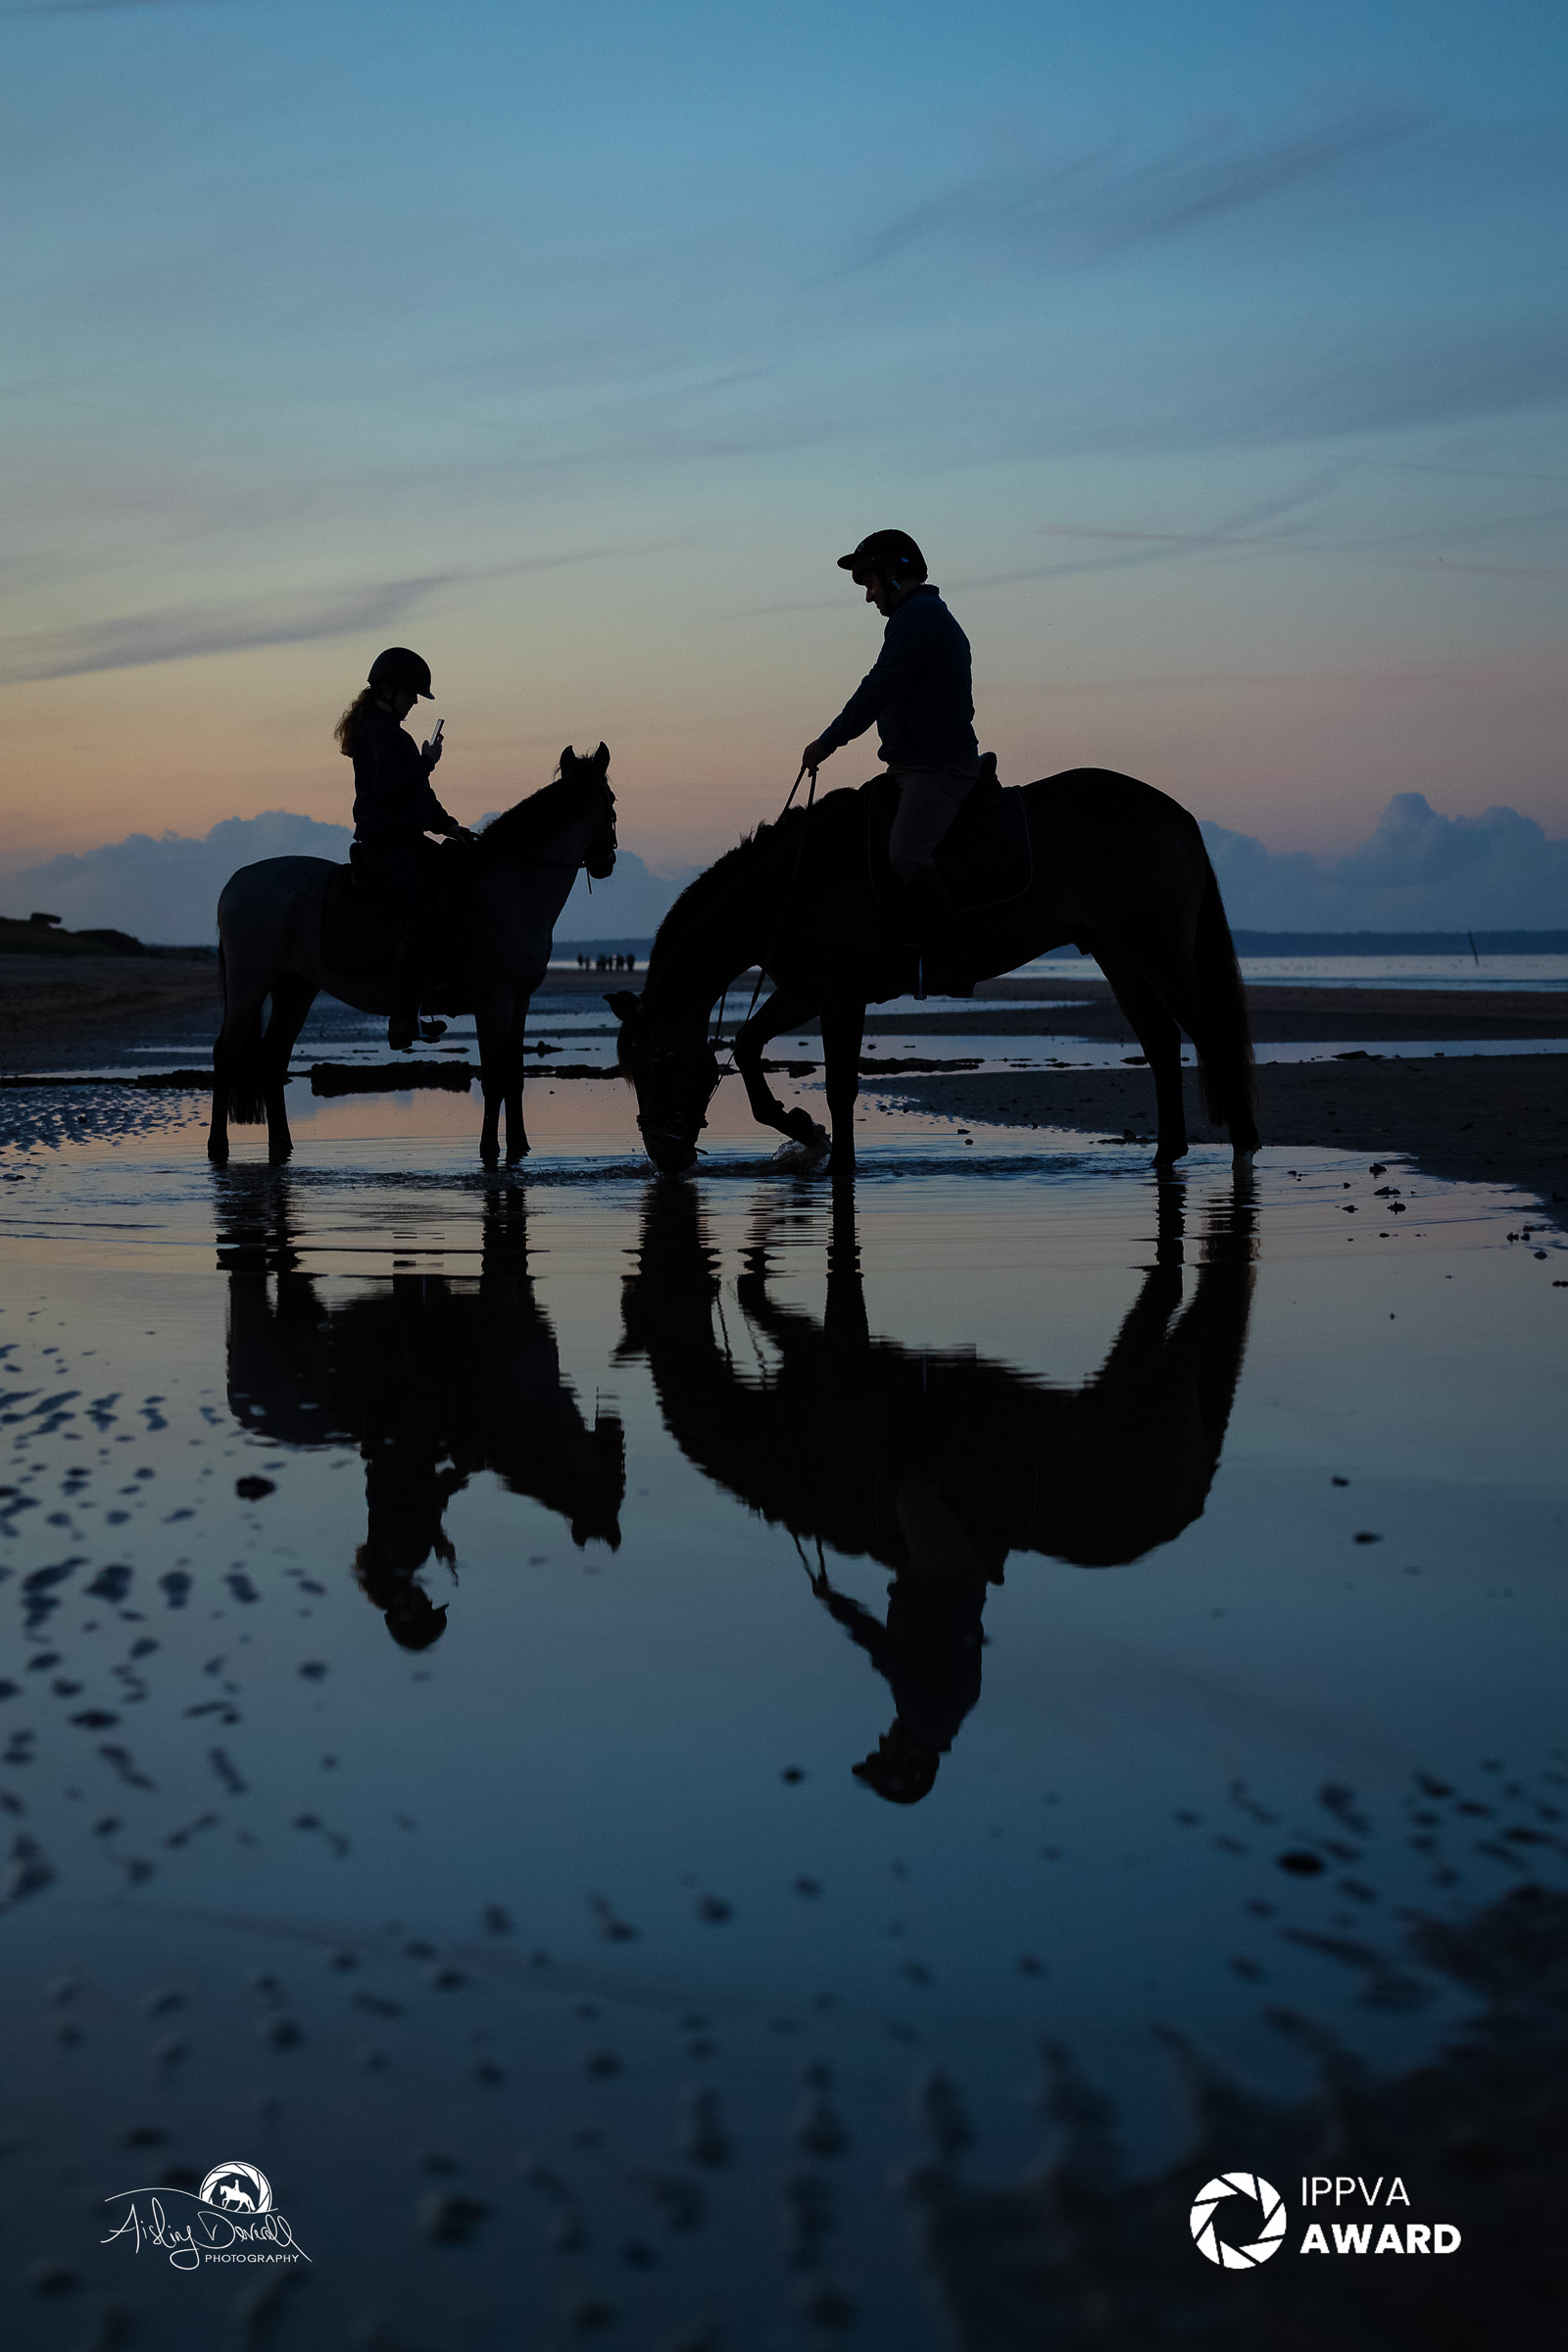 award winning silouette of two horses end riders on a beach at sunset